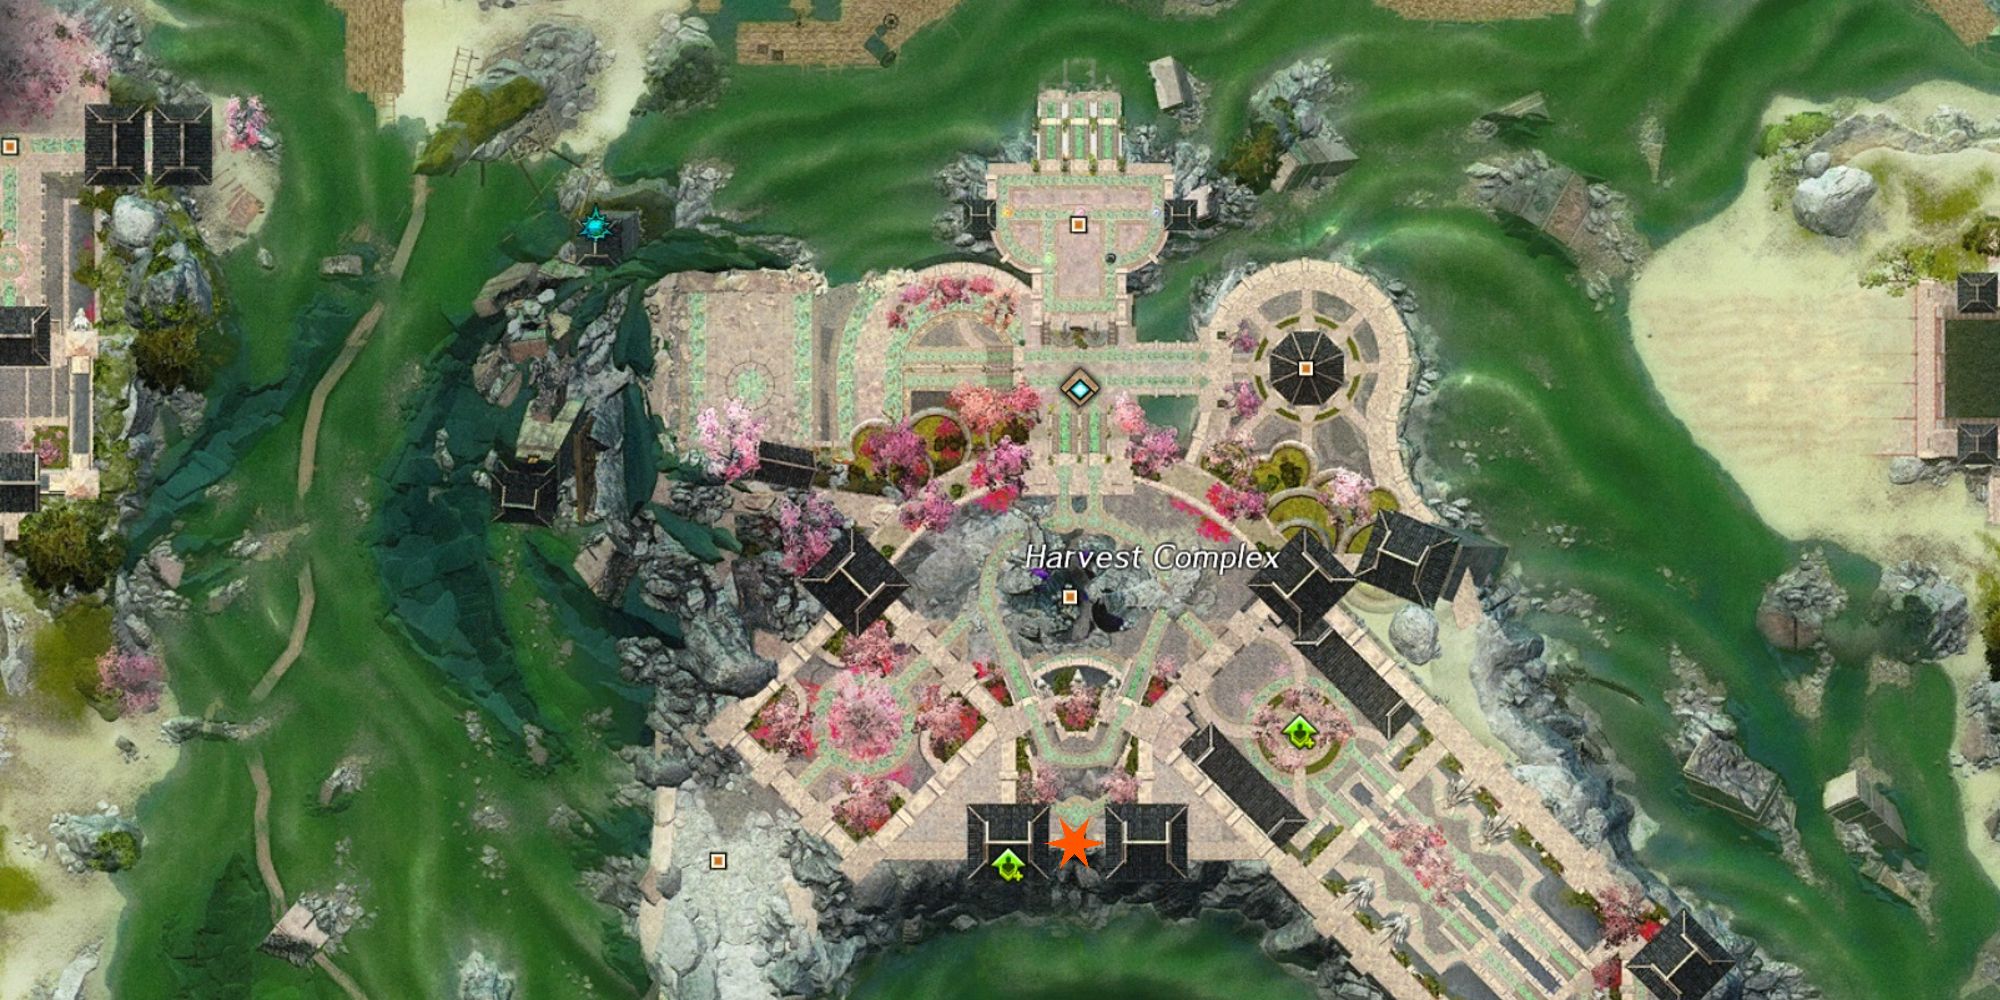 harvest complex in dragons end with marjorys location highlighted